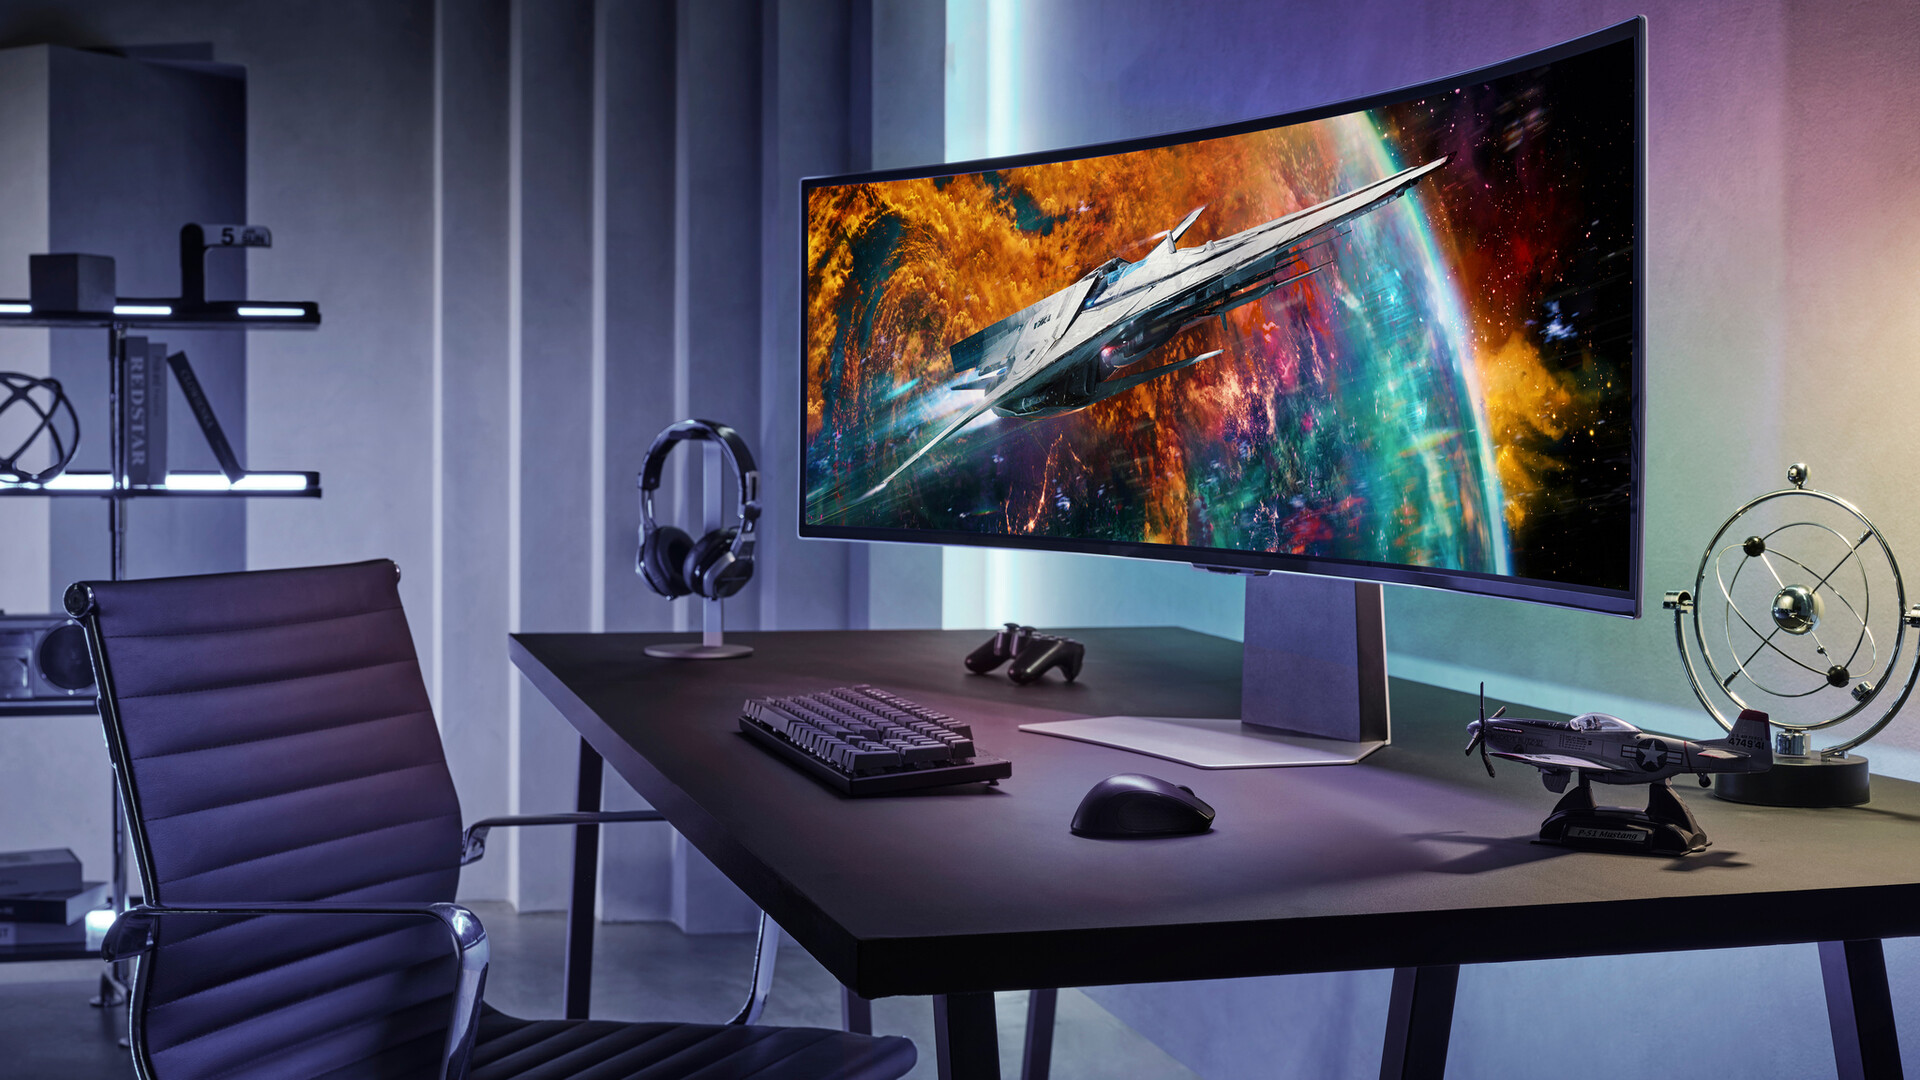 Samsung Odyssey Ark gaming monitor refreshed with new G97NC model